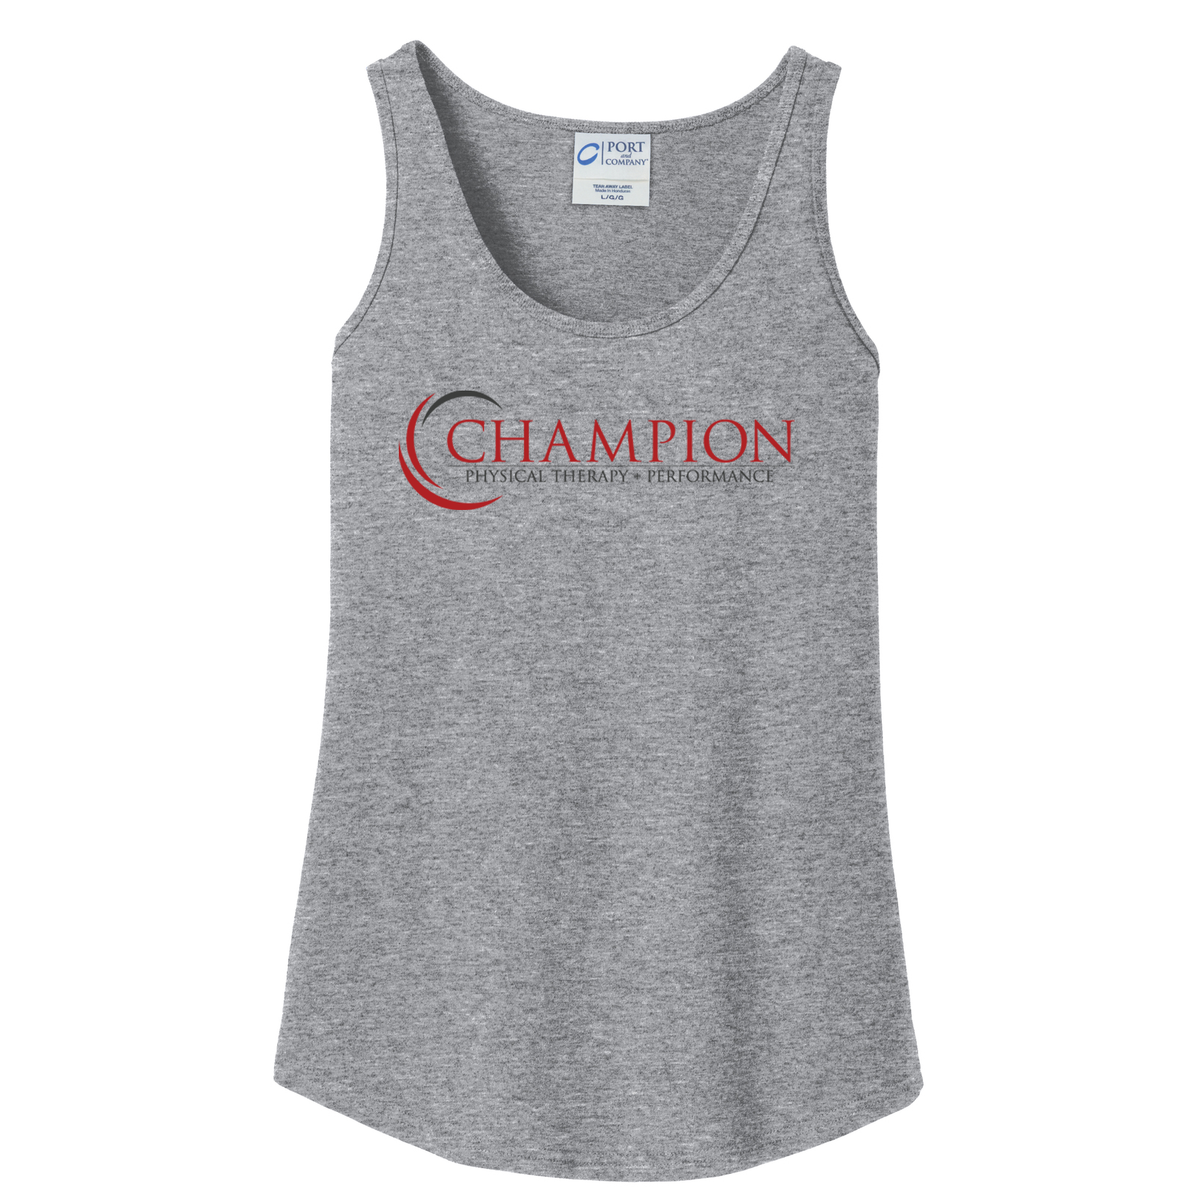 Champion Physical Therapy Women's Tank Top